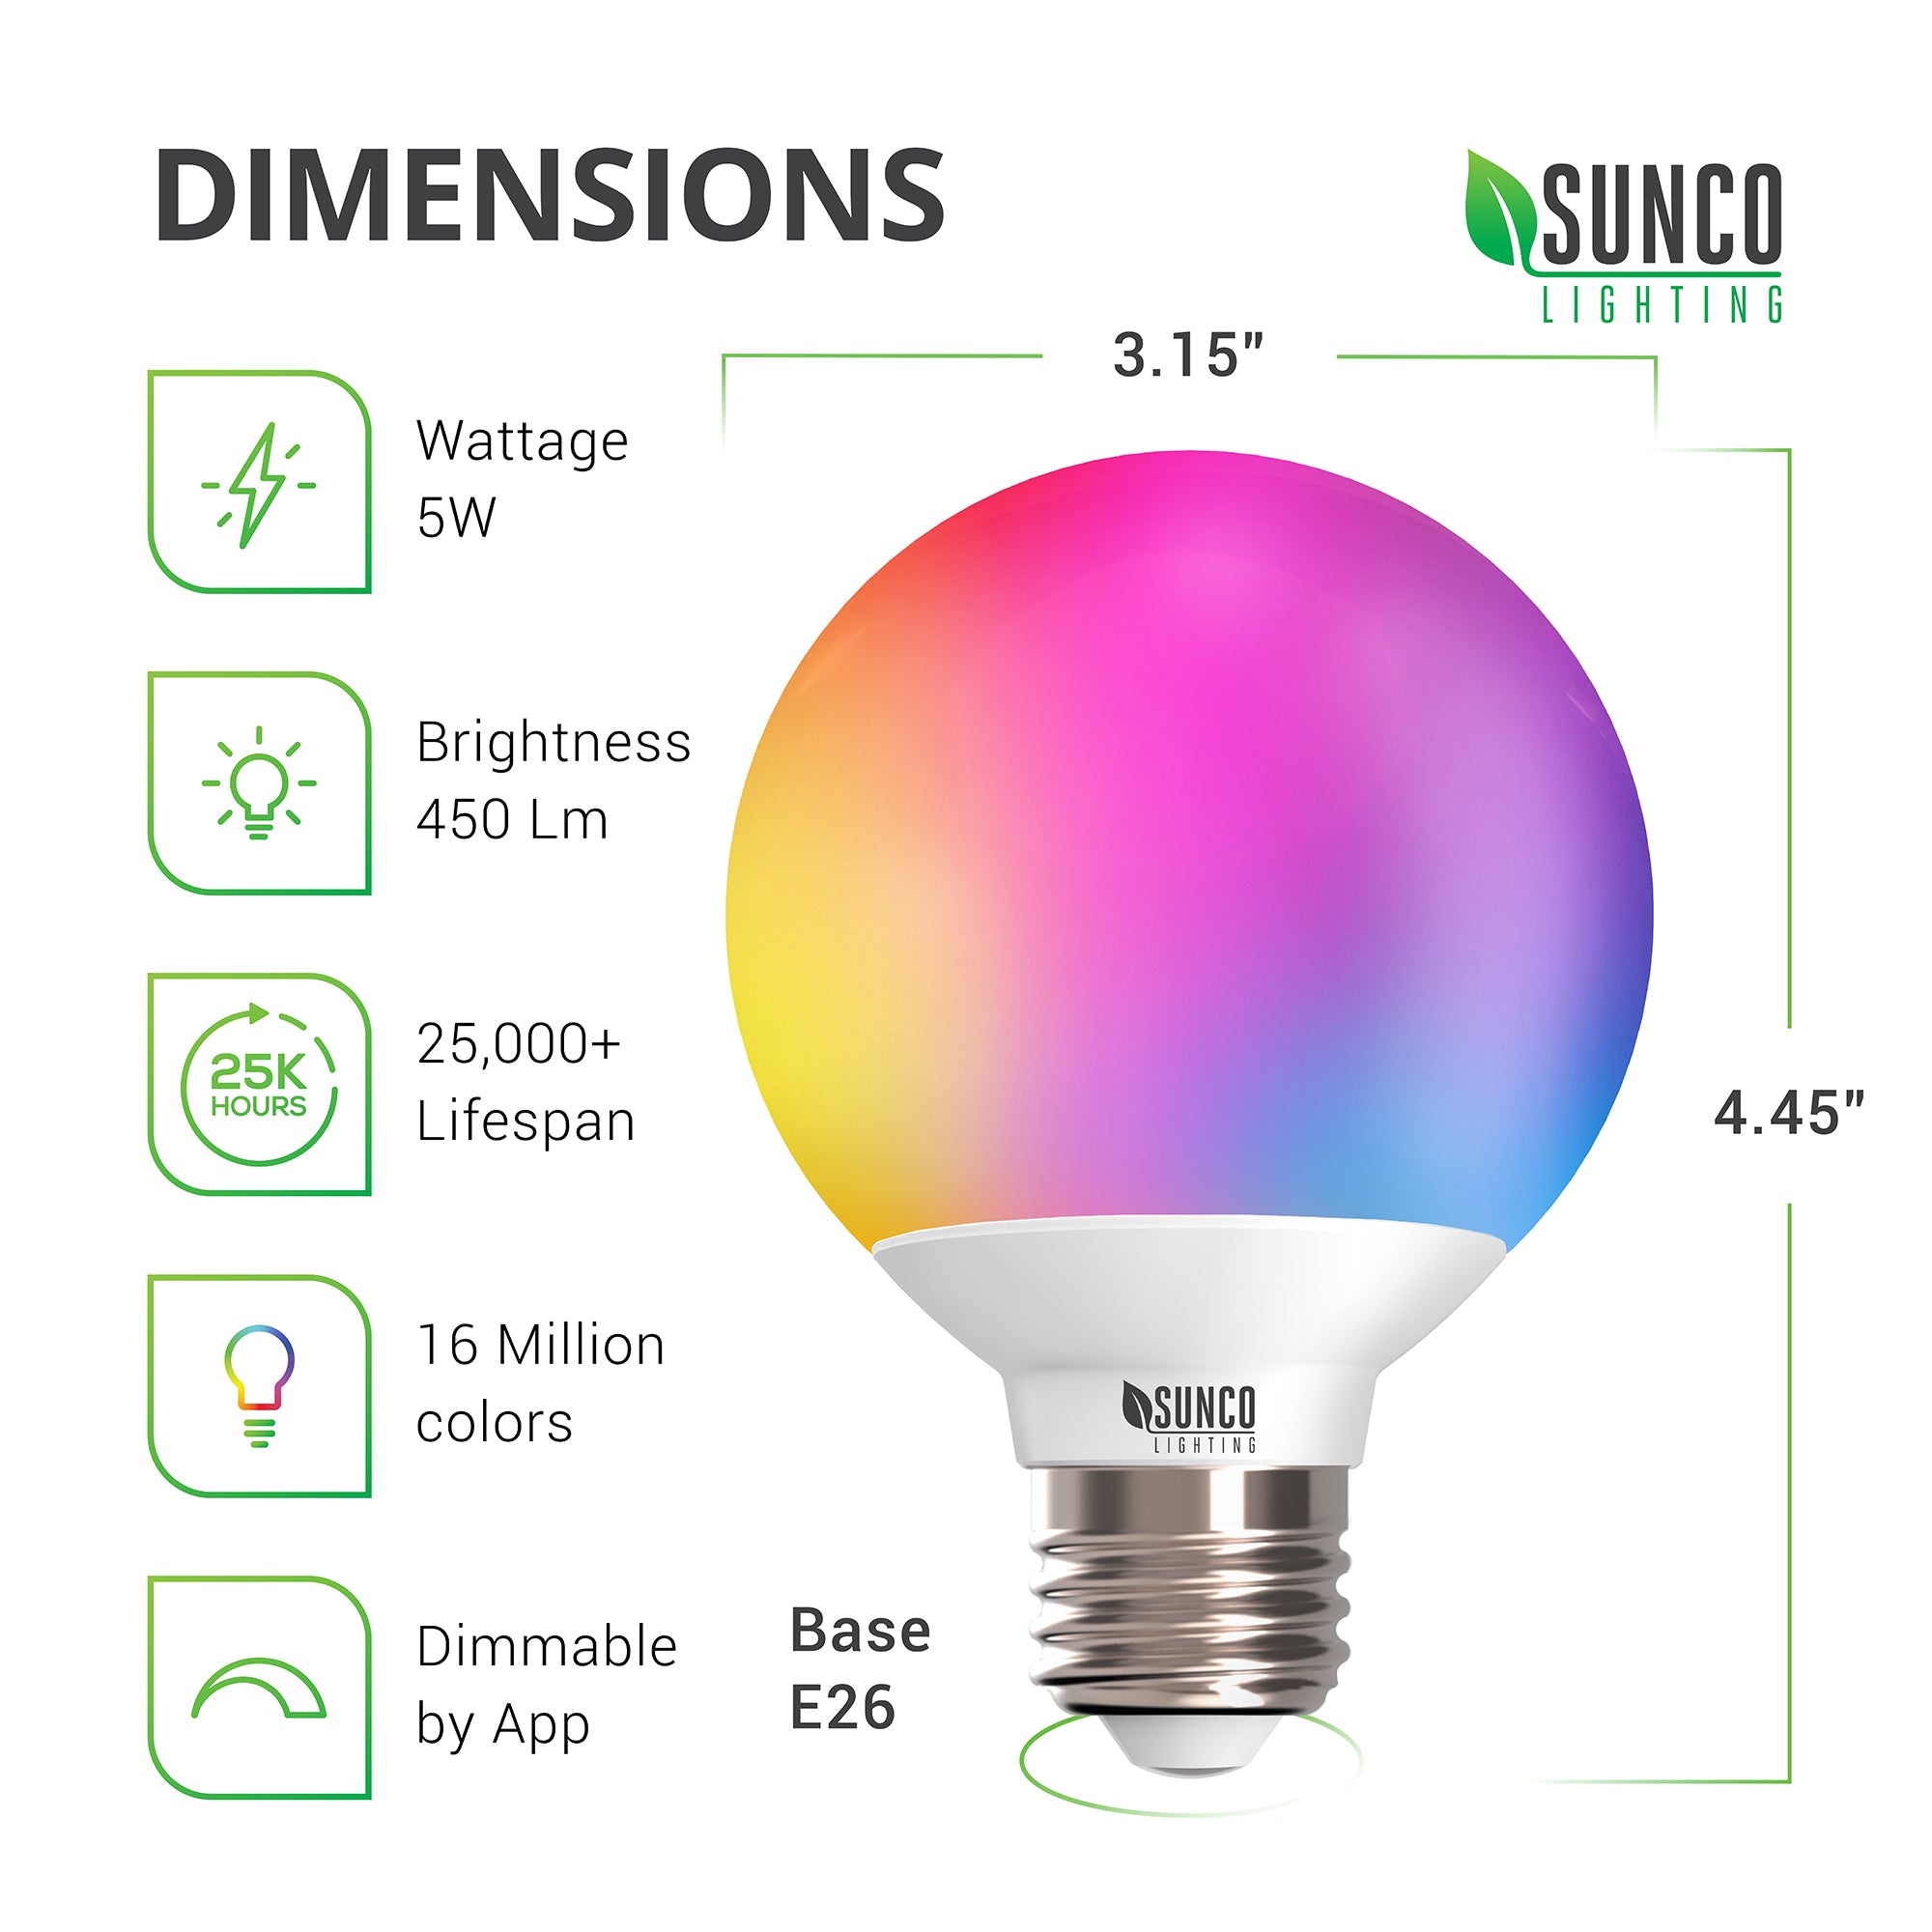 Dimensions of G25 LED Smart Bulb from Sunco Lighting. Diameter: 3.15 inches, Height: 4.45 inches, Base: E26. This smooth dimming 5W LED bulb includes a 450 lumen brightness, 16 million colors to choose from, and a tunable white setting. The LED Smart light bulb is dimmable via the app. See the install manual for instructions on connecting your smart device and the light bulb and how to control the light bulb with your voice or the app.